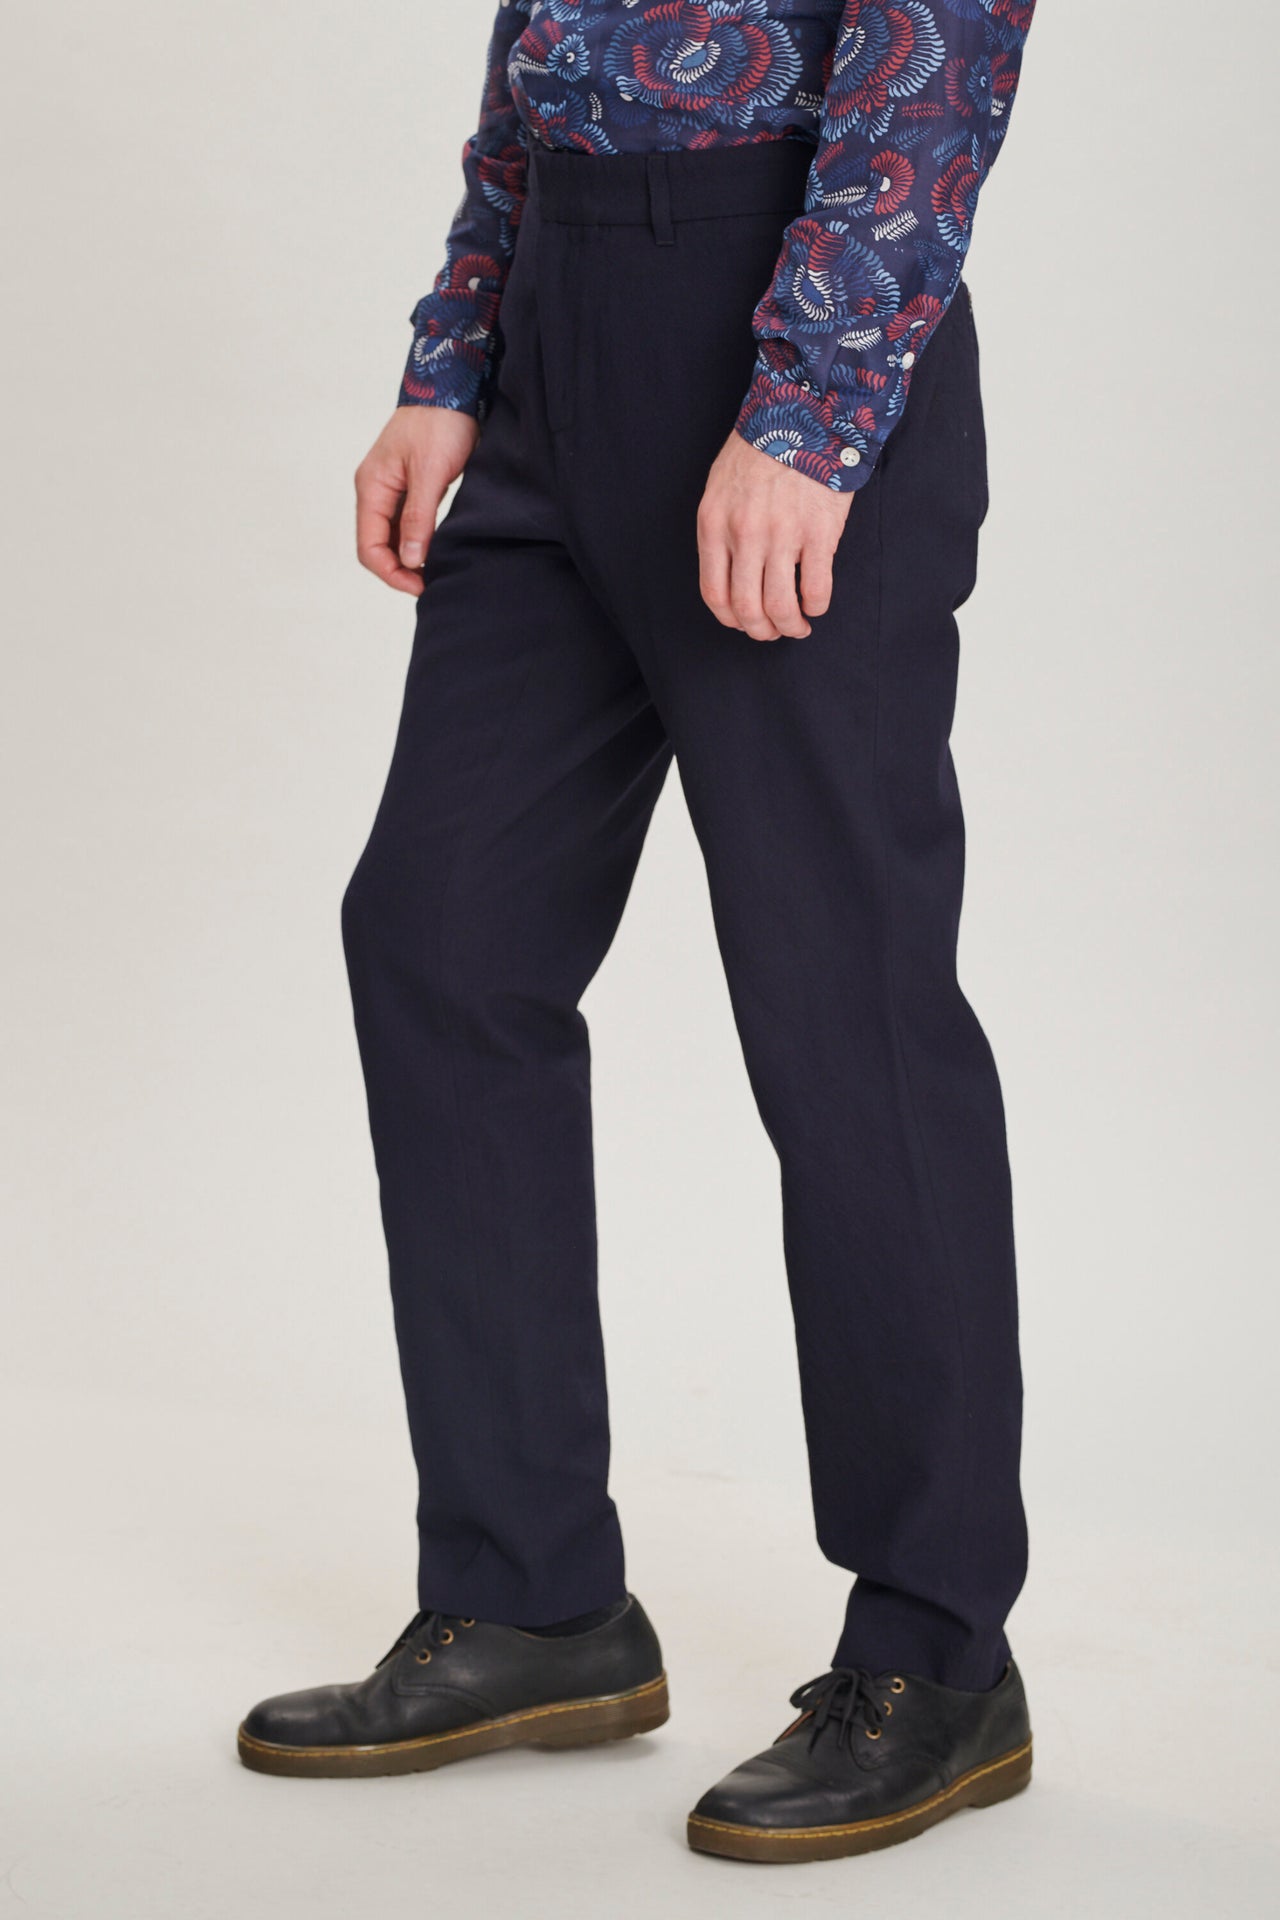 Town Trousers in the Finest Navy Blue Italian Soft Merino Wool by Bonotto